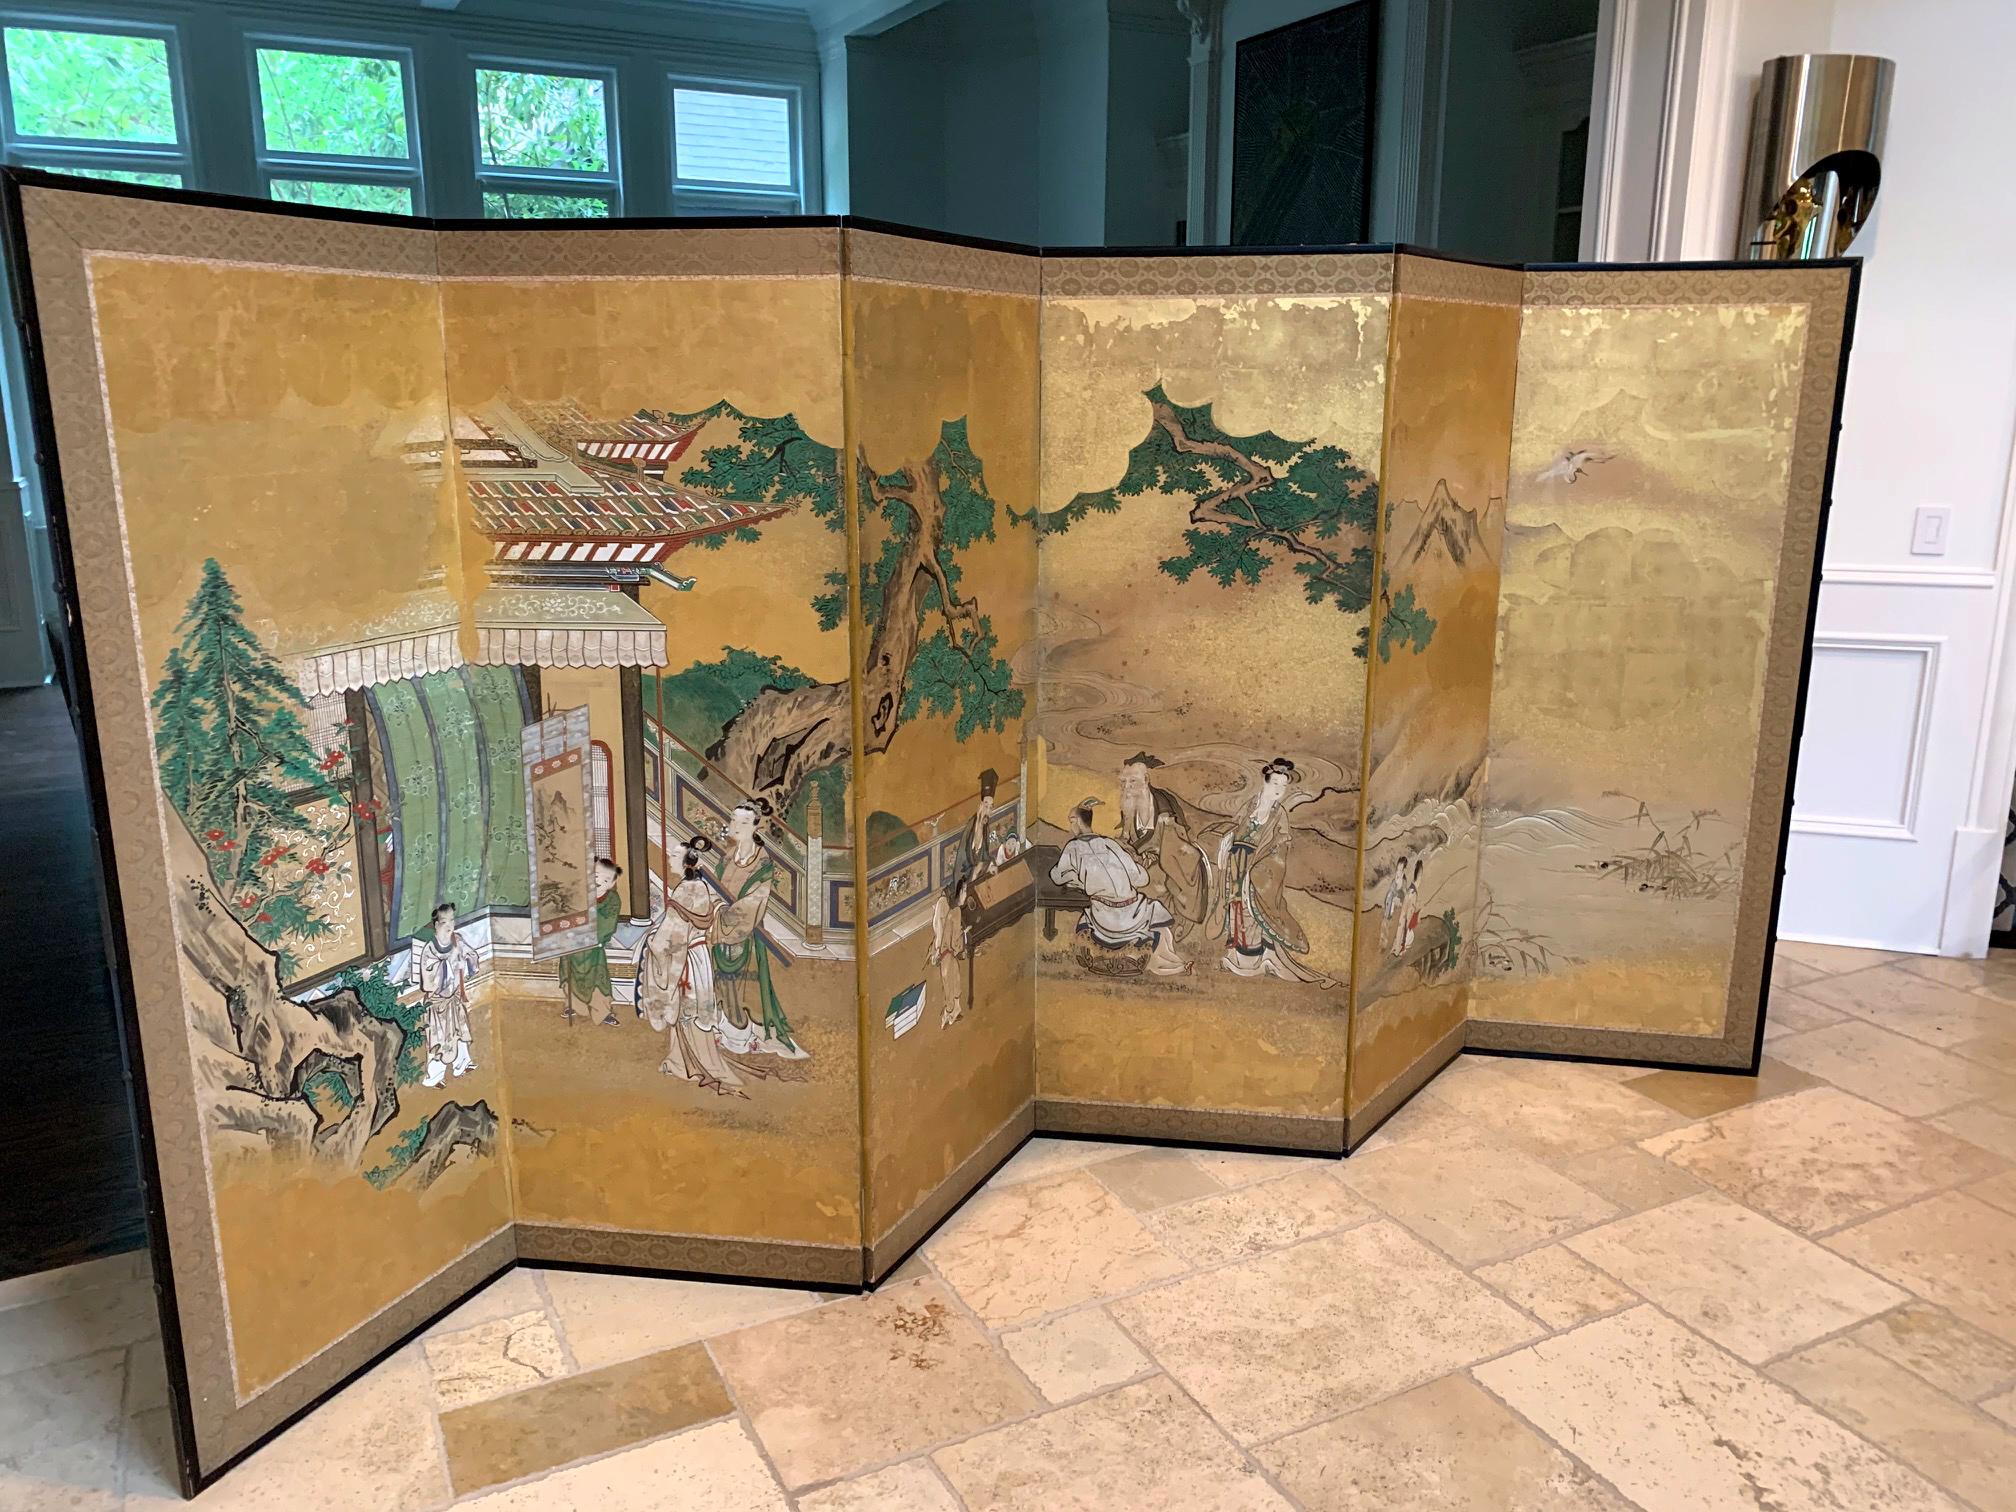 A Japanese floor screen with six folding panels in wood frames with brass hardware and gilt paper backing circa 18th century in Edo period. The screen depicts a Classic Chinese literary scene with groups of figures in the garden landscape setting.